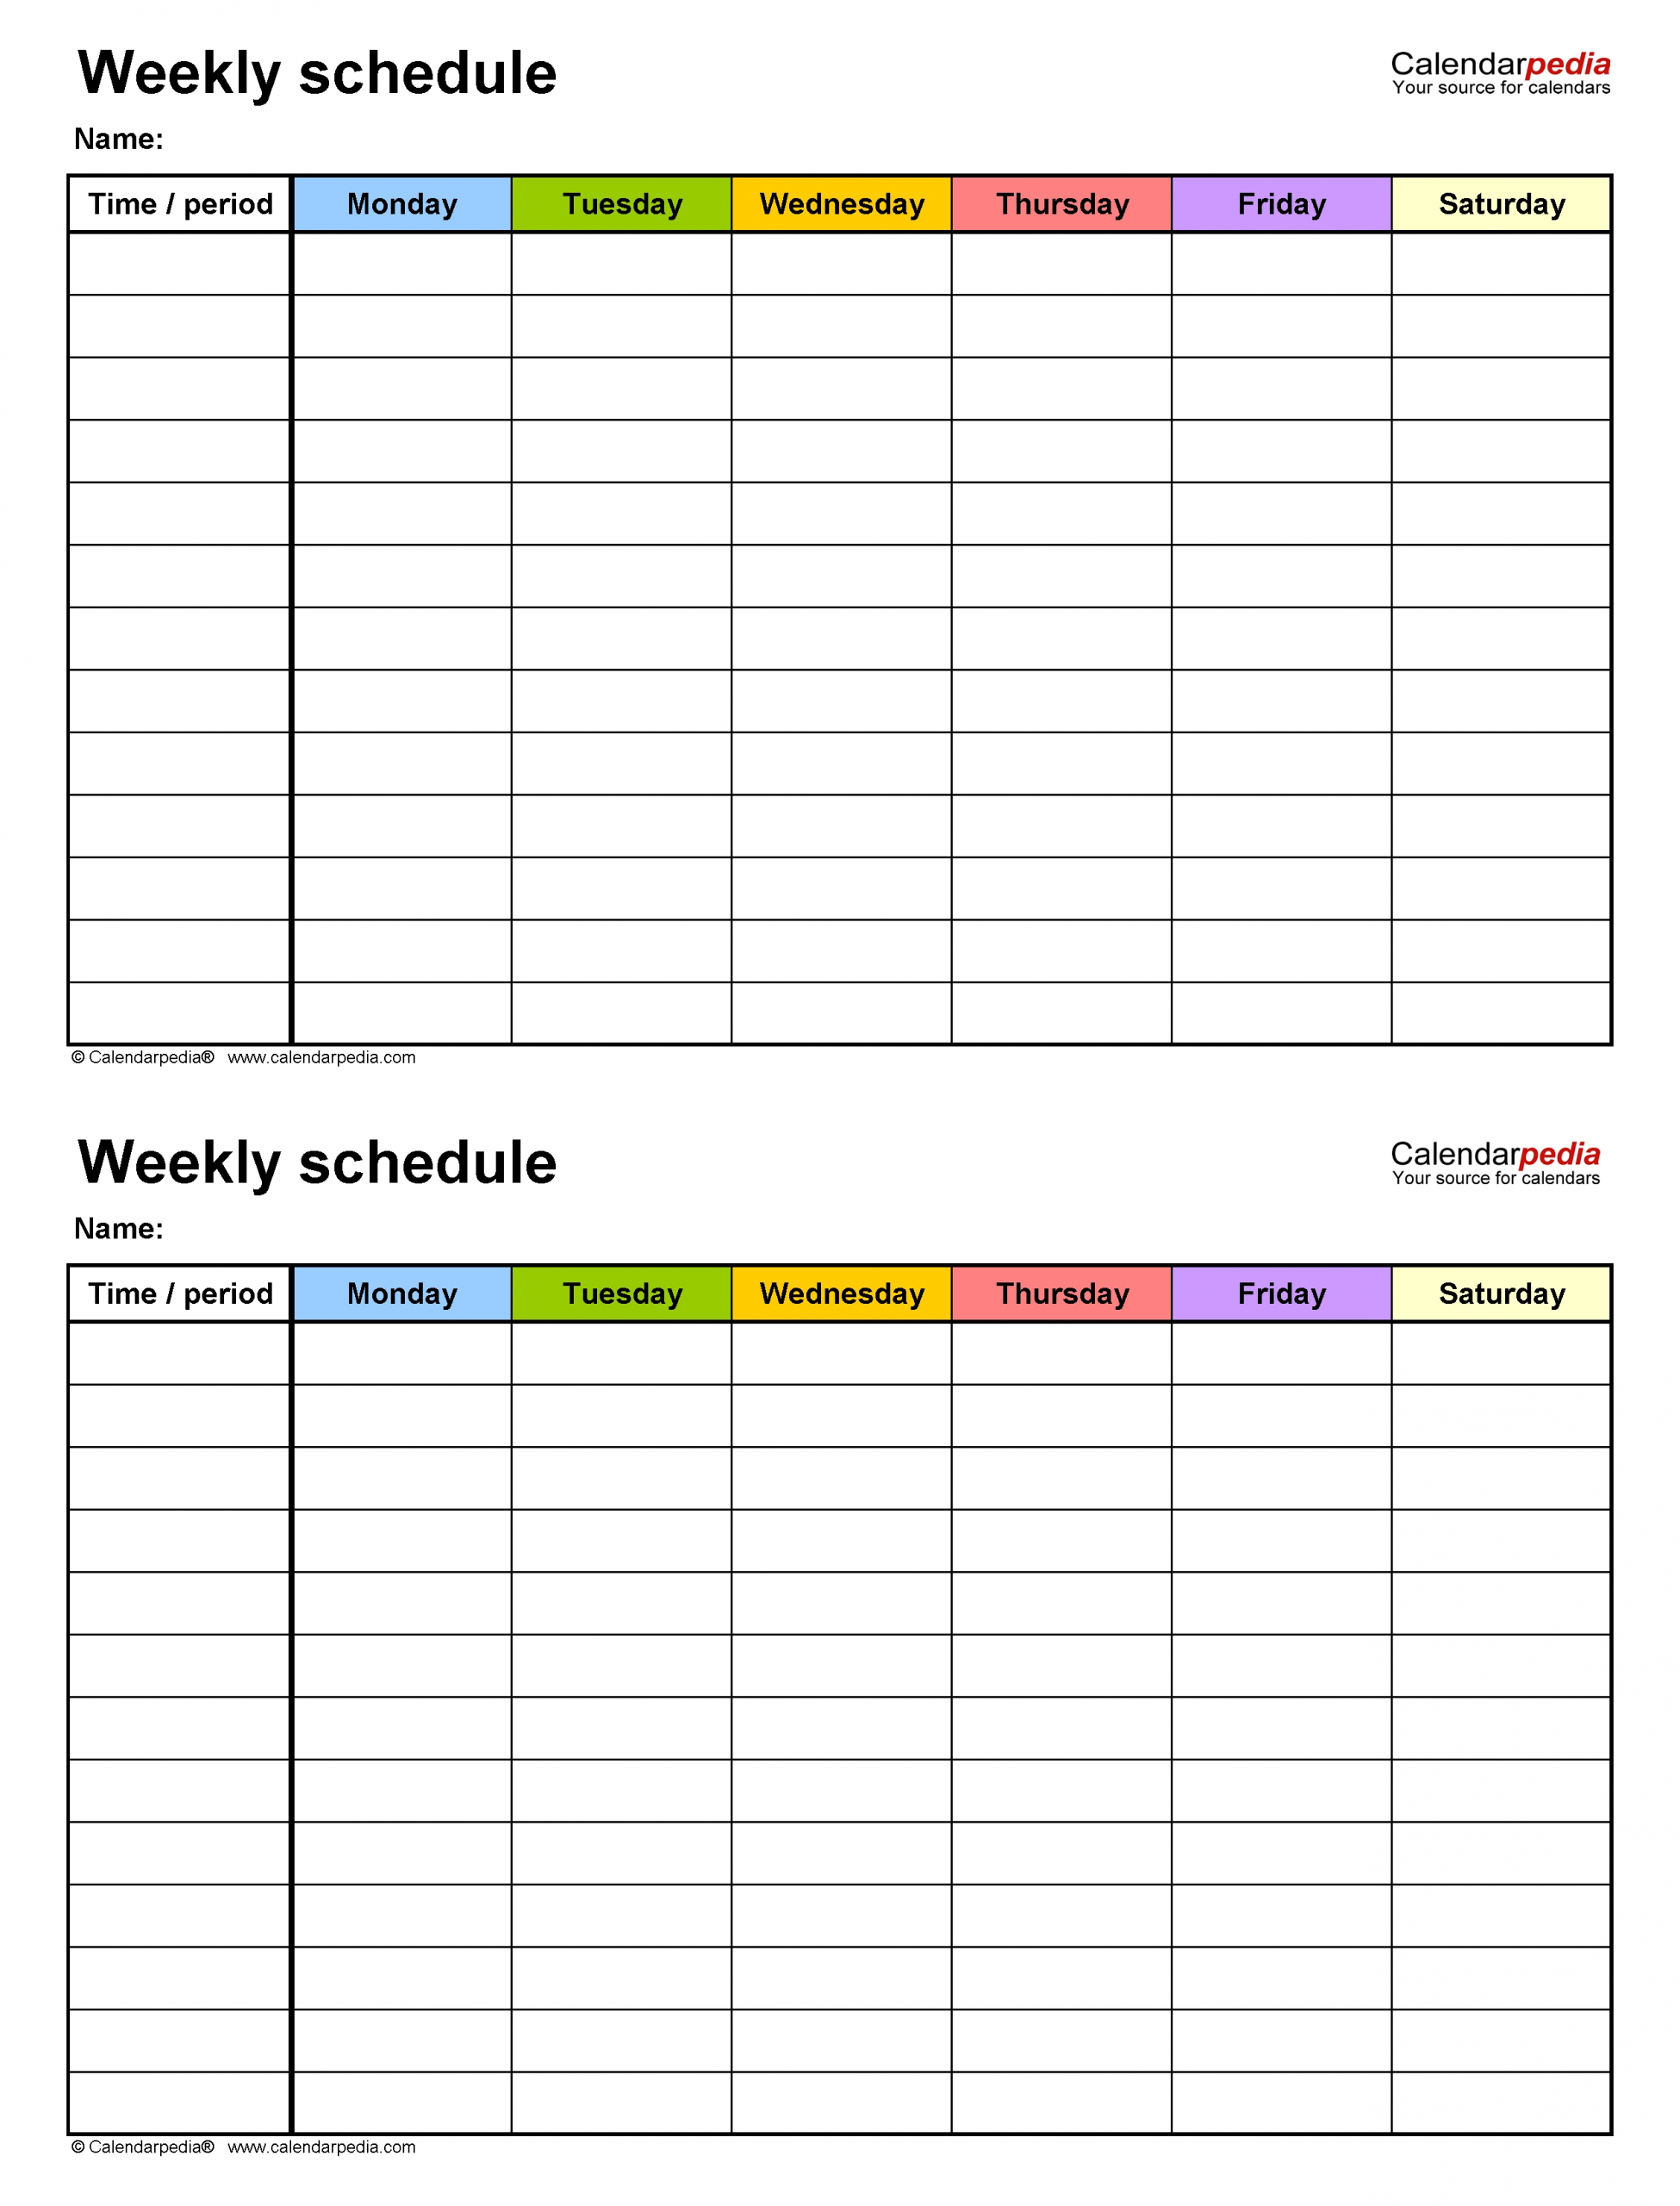 Get How To Make A Schedule Monday Through Friday 9 - 3